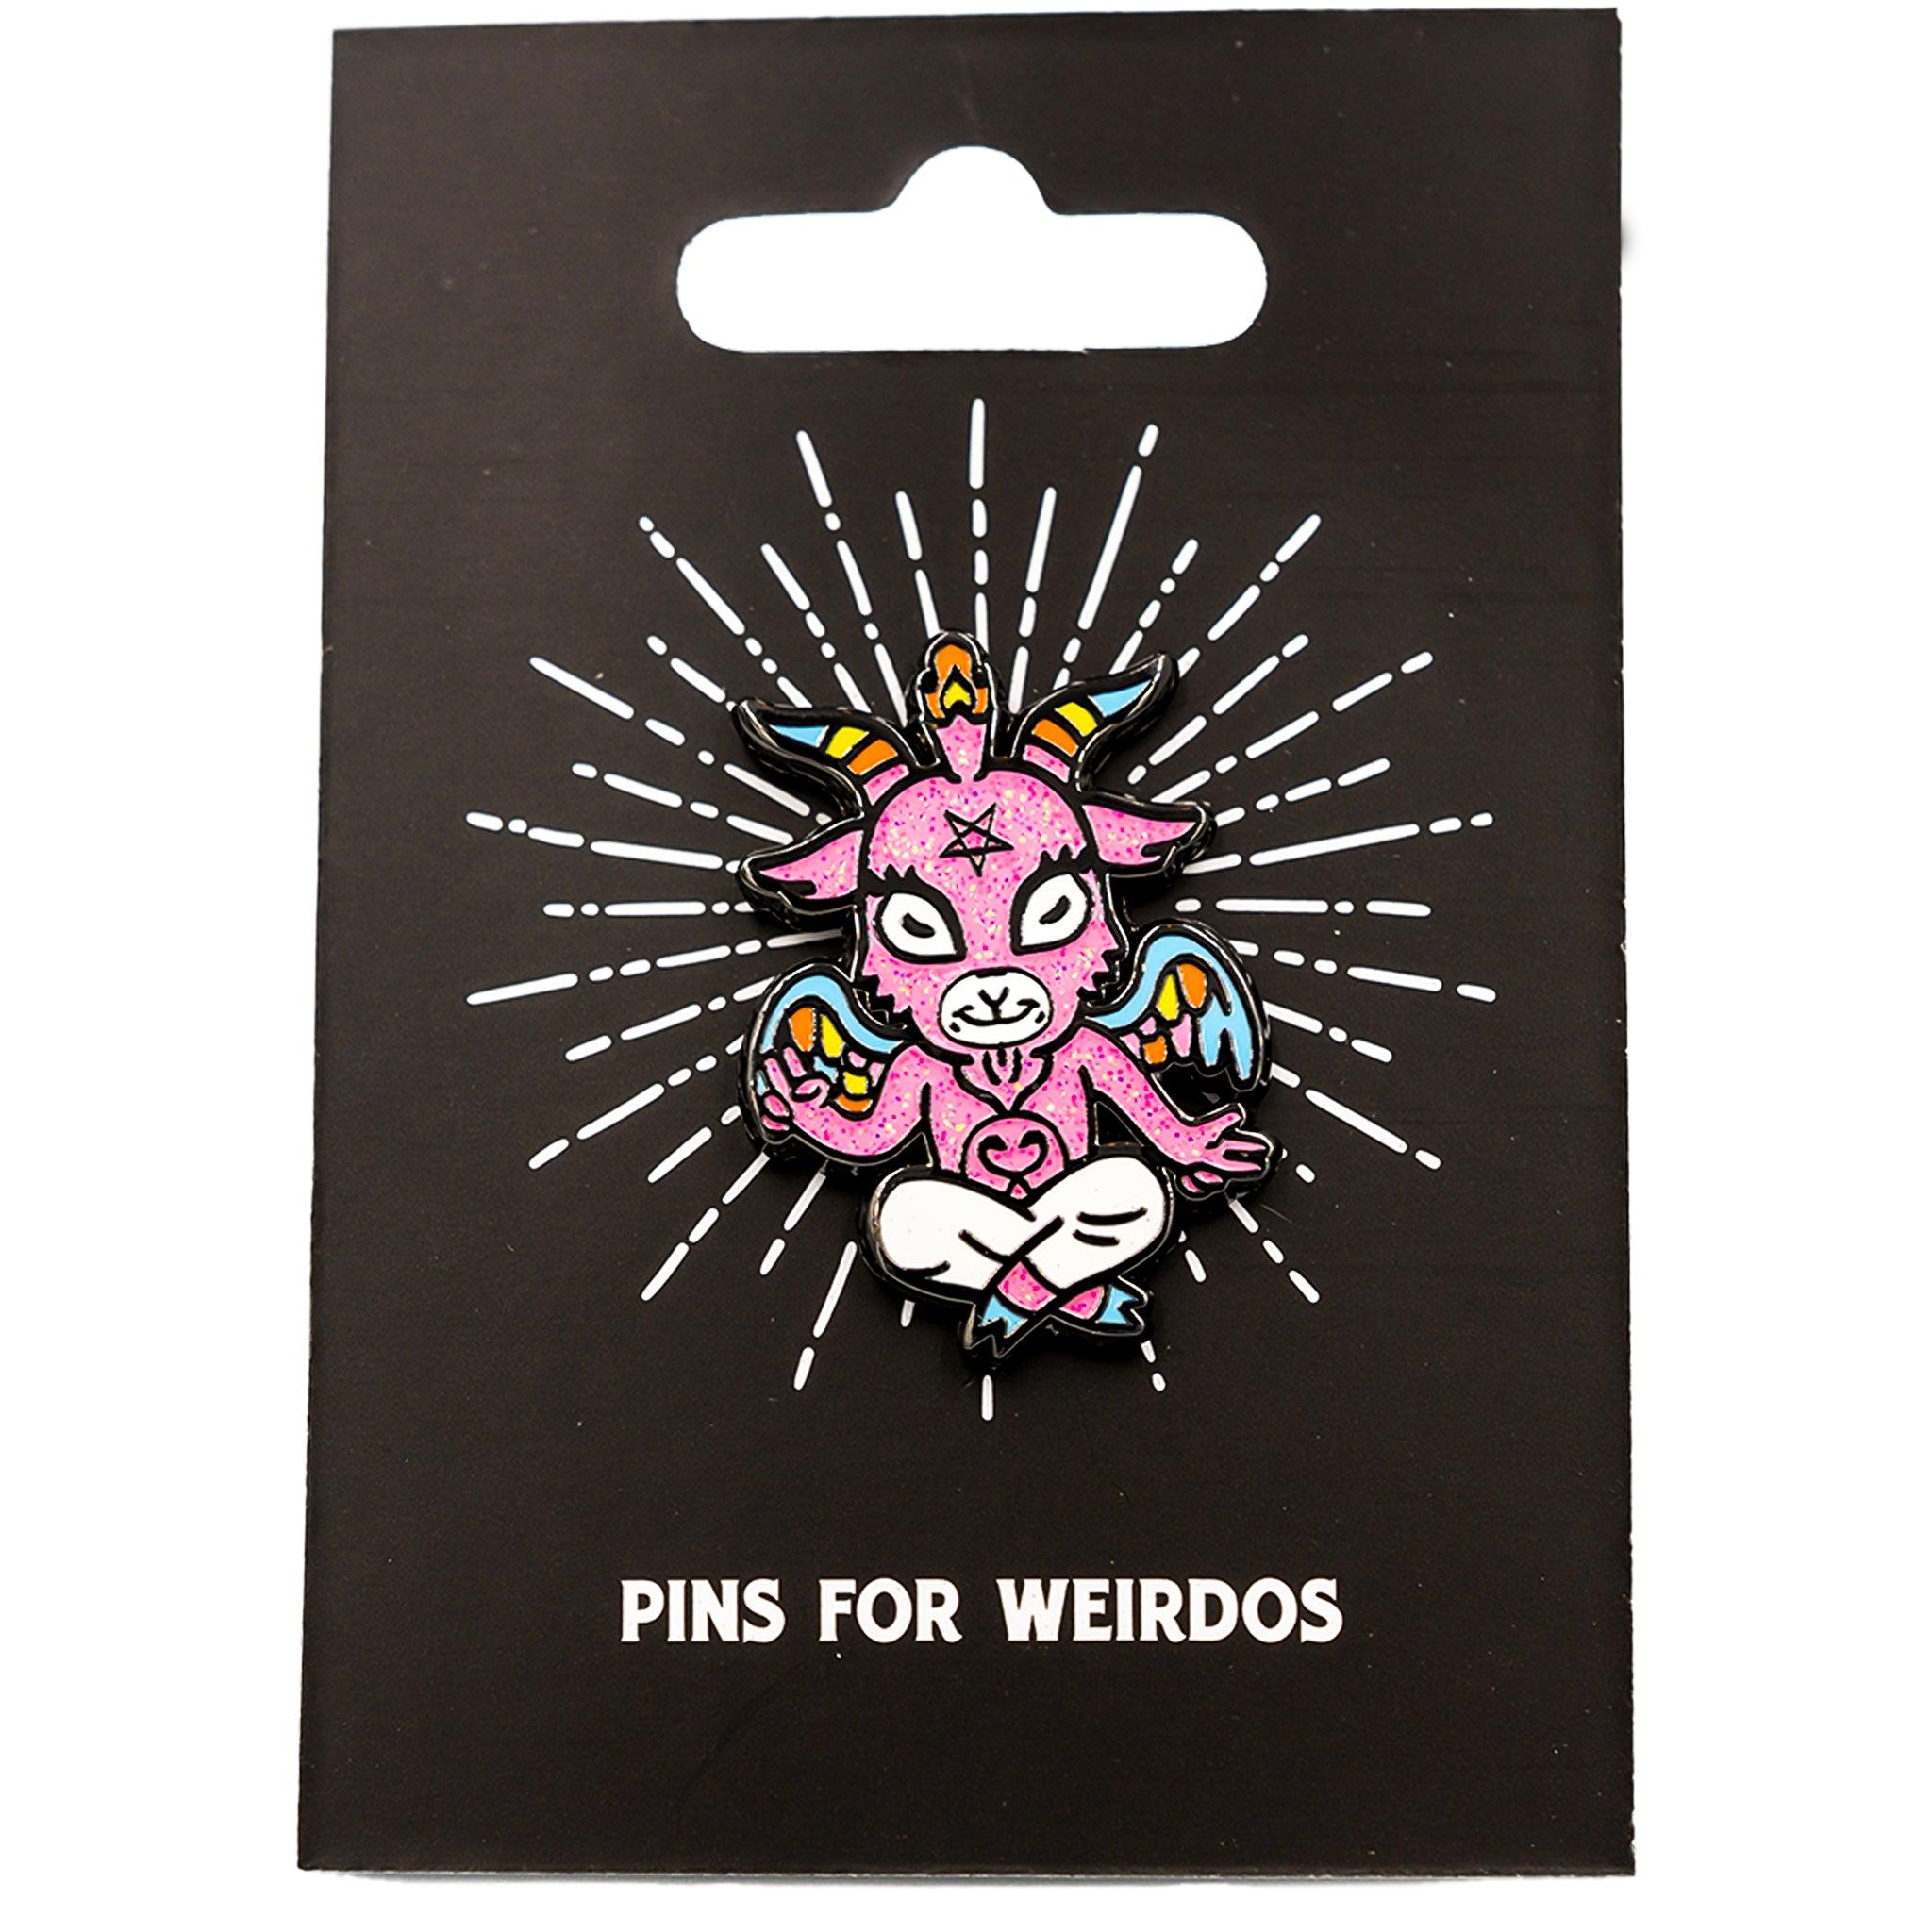 Cute Baphomet Goat Hard Enamel Pin with Glitter - FootClothes